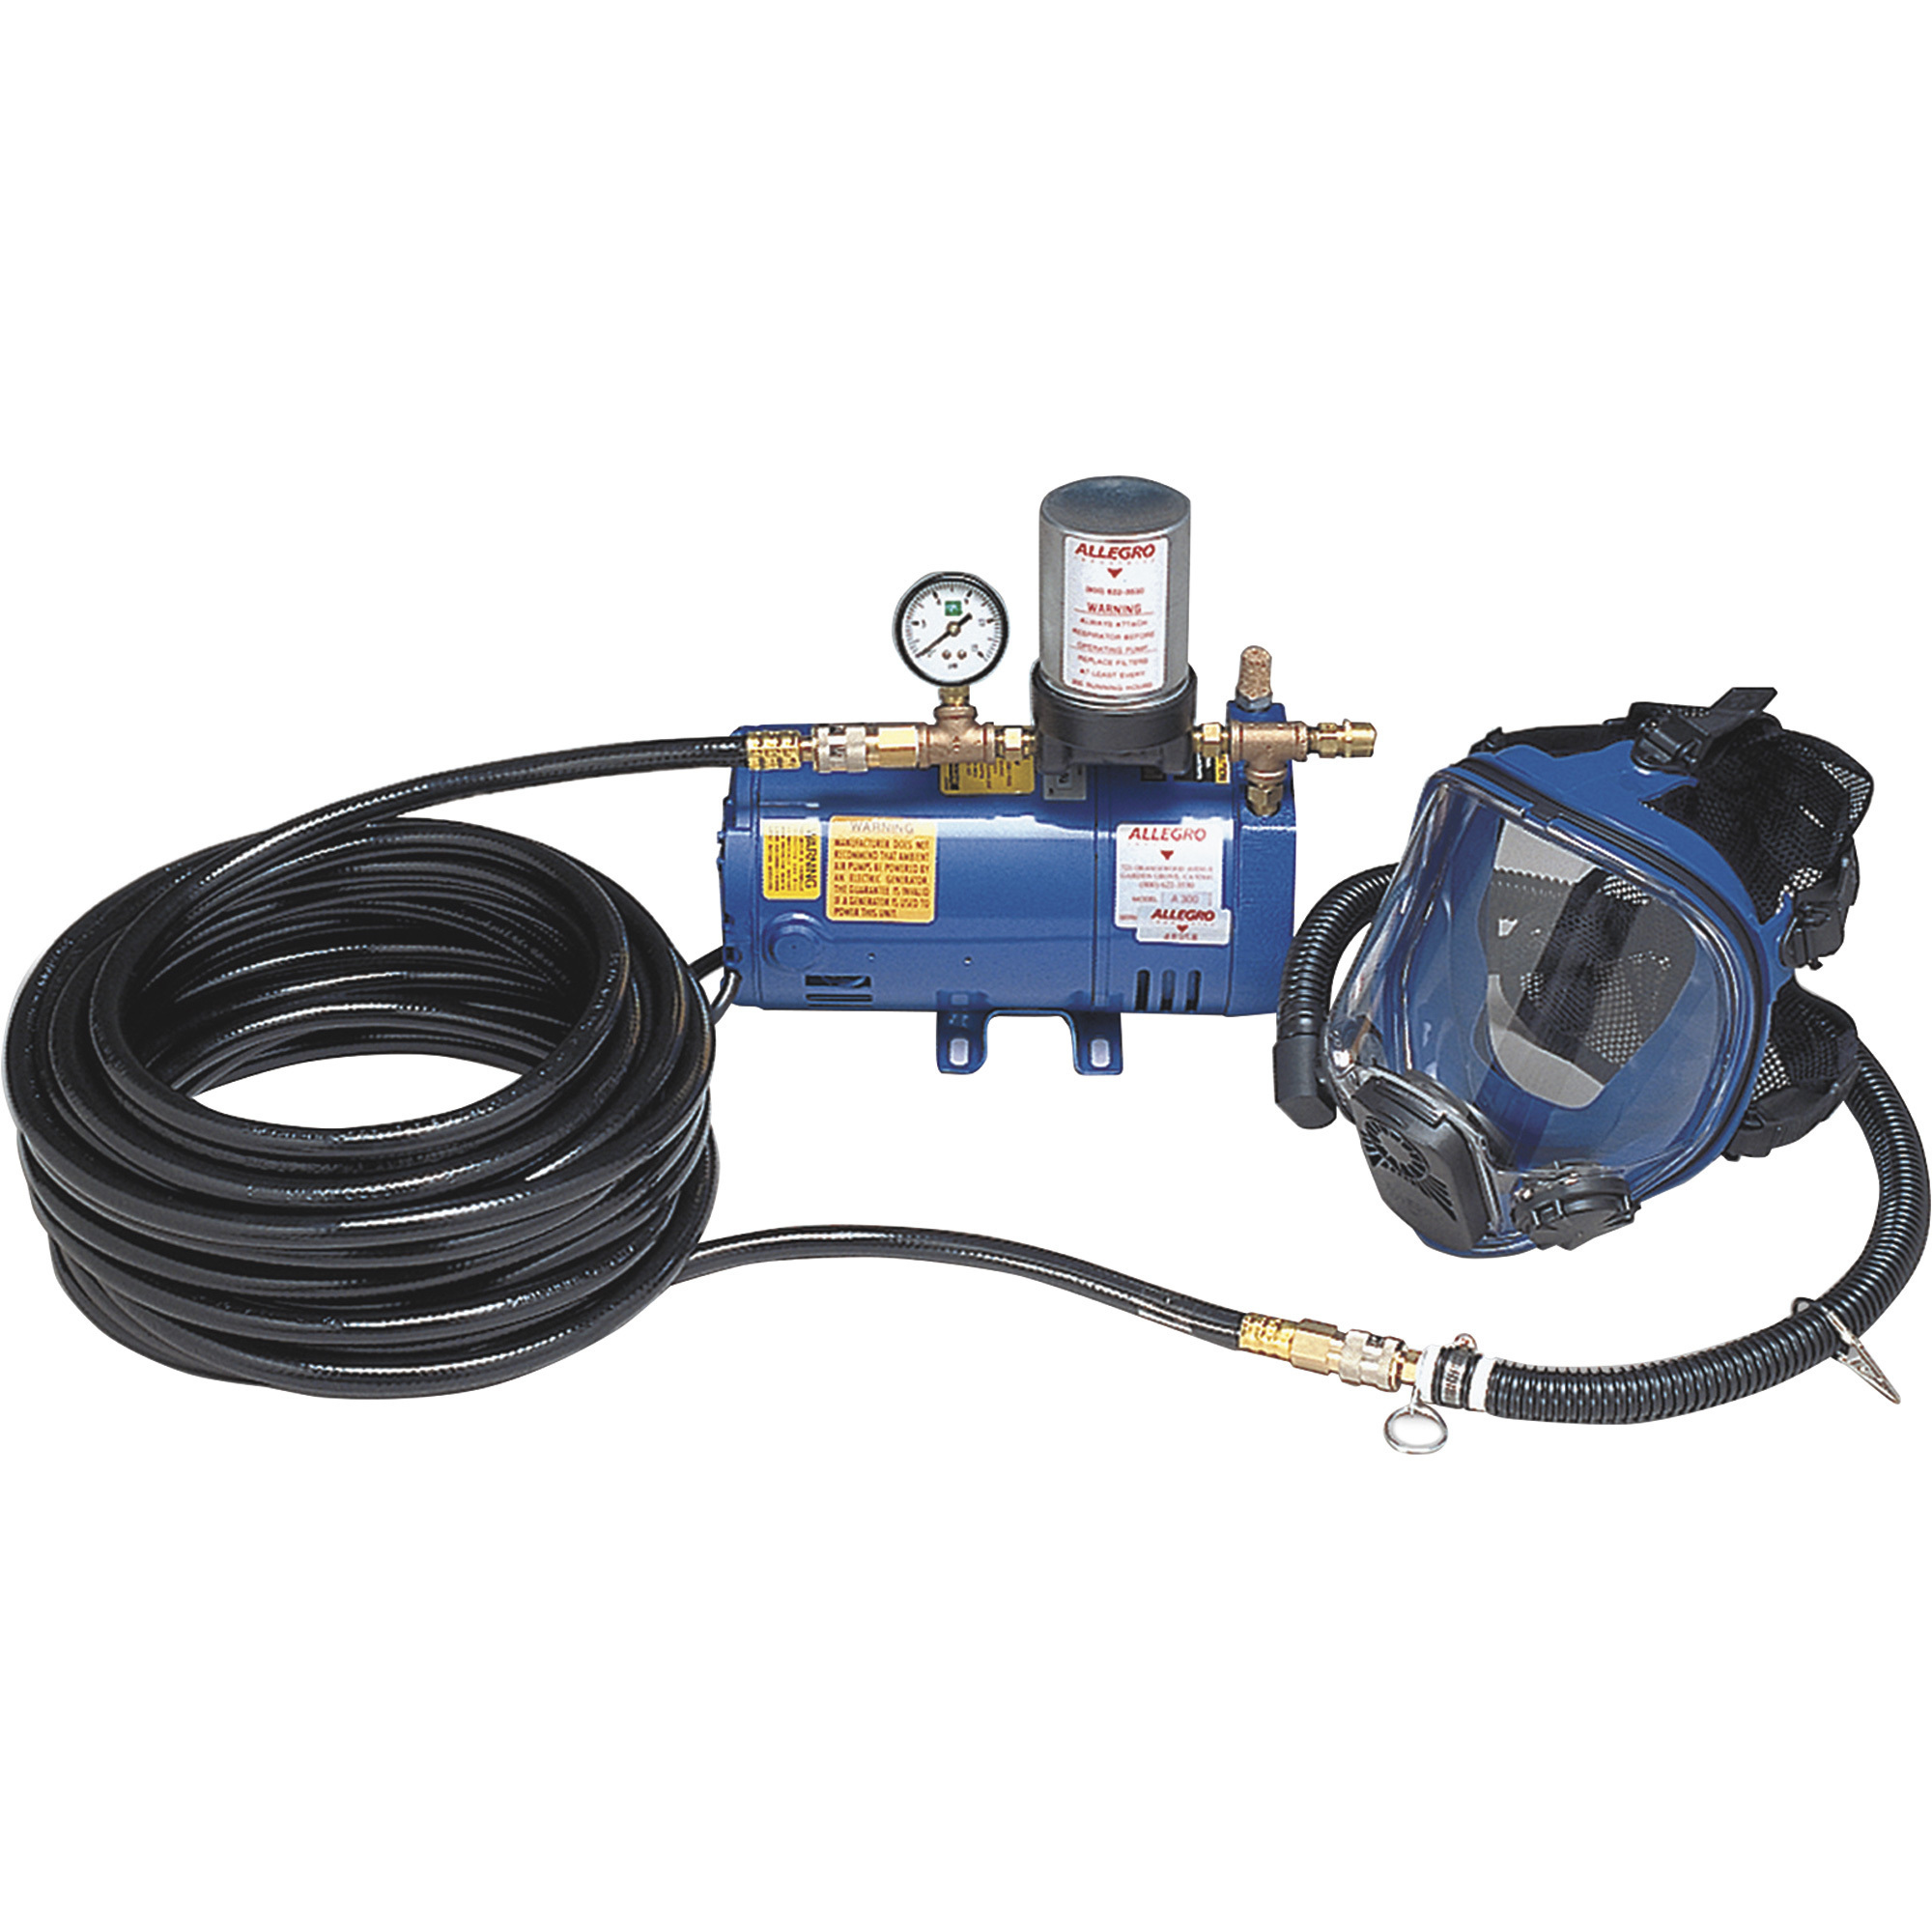 Allegro Full Mask Respirator System, With One HP Ambient Air Pump, One 50ft. Breathing Air Hose, Model 9200-01